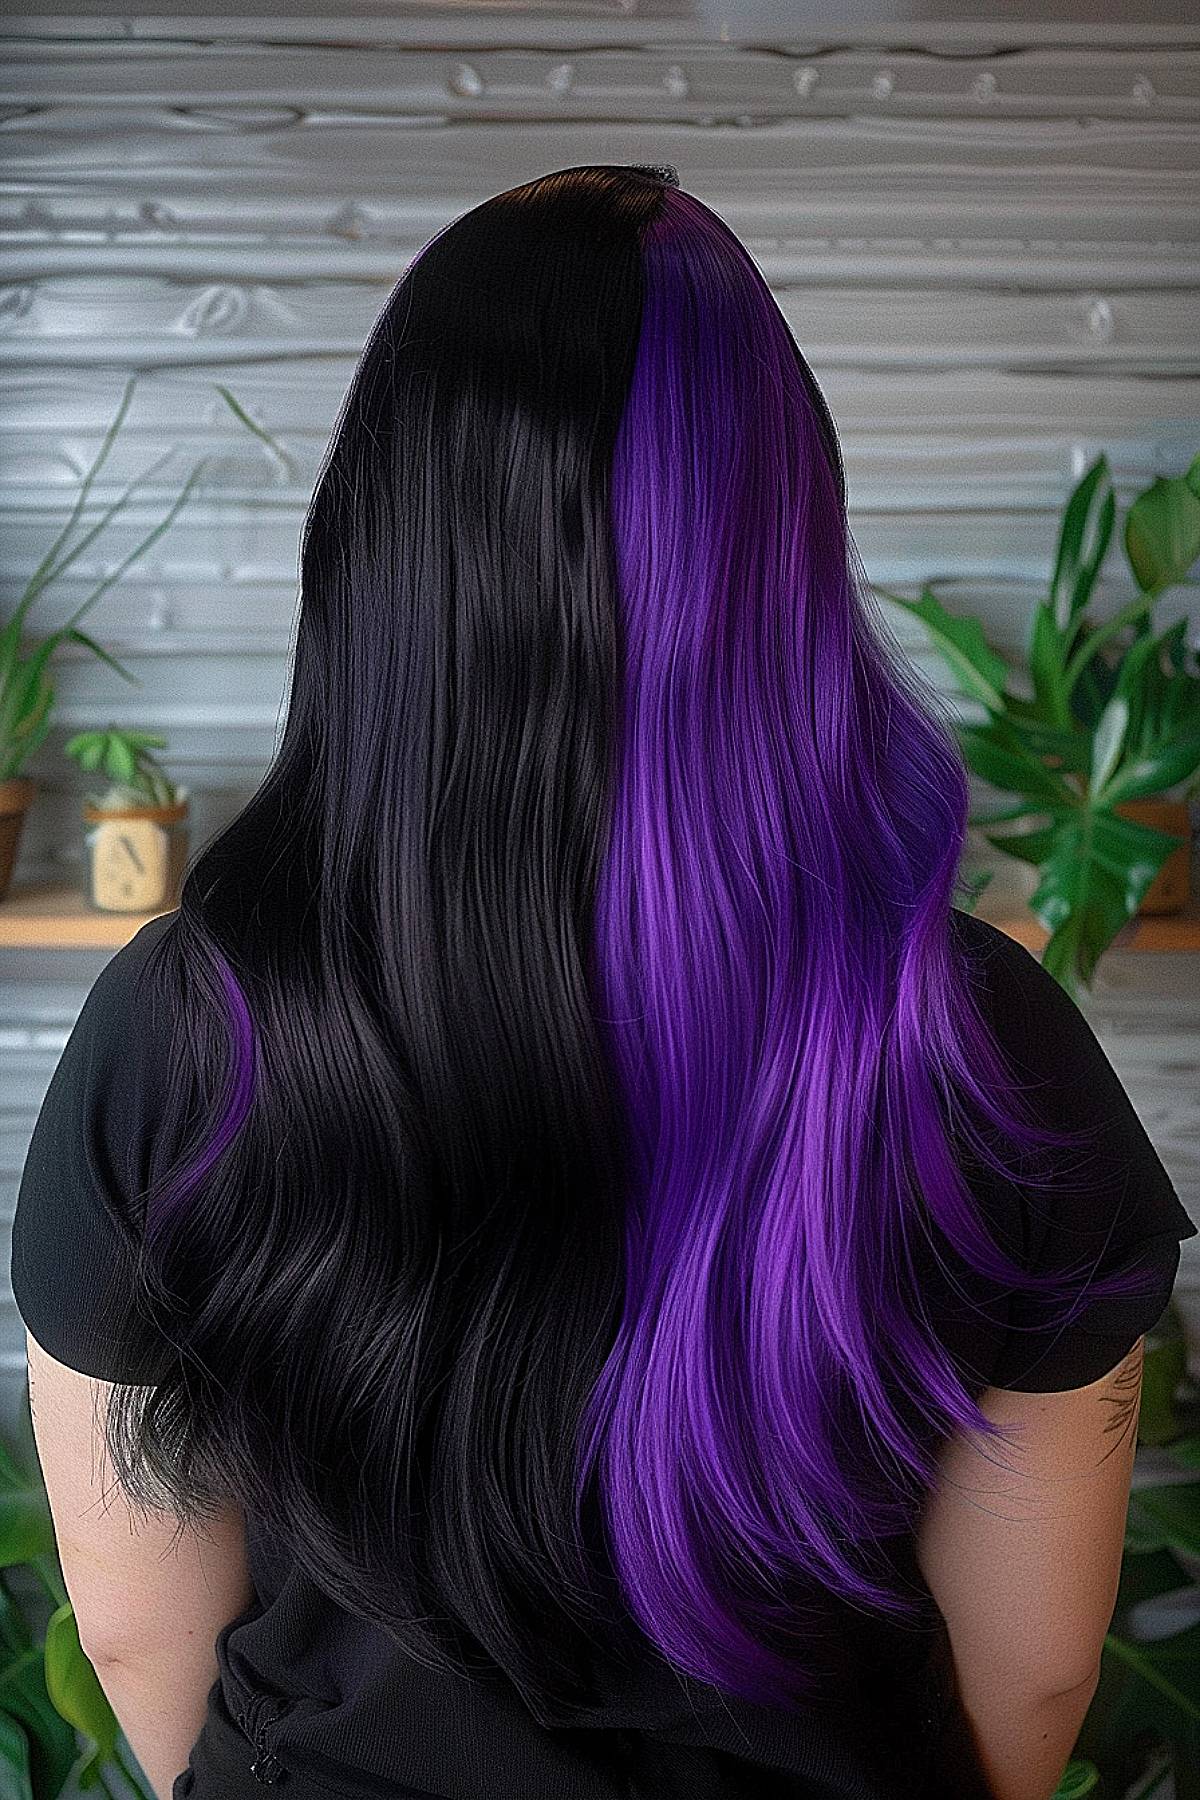 Long, wavy hair with a bold transition from sleek black to vibrant violet, perfect for a bold Gemini statement.